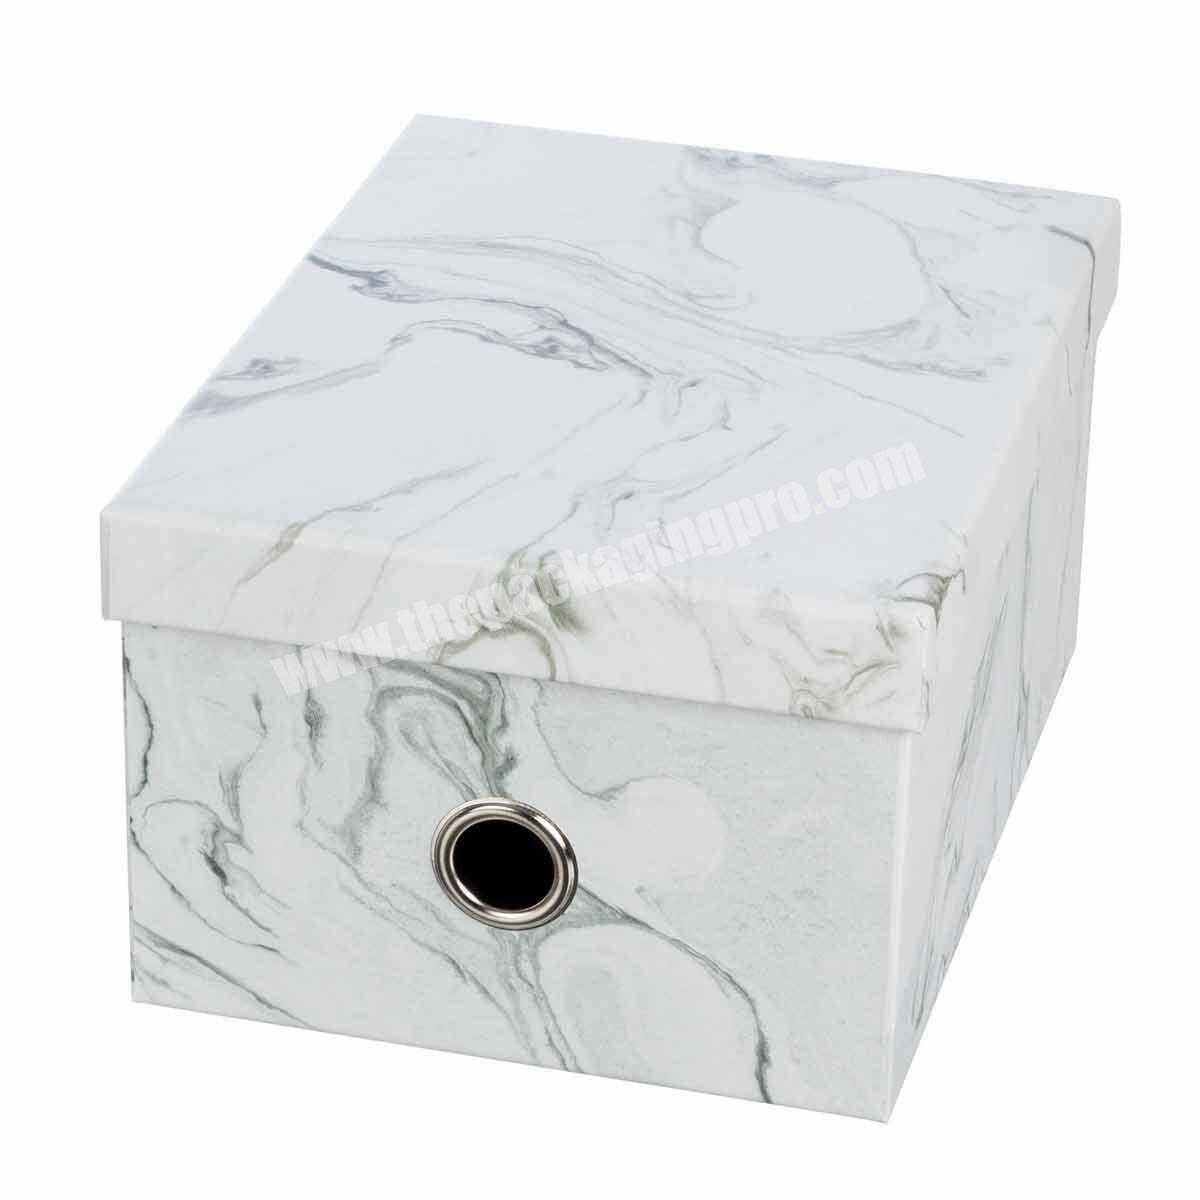 High quality white shoes packaging box, marble printing white cardboard box